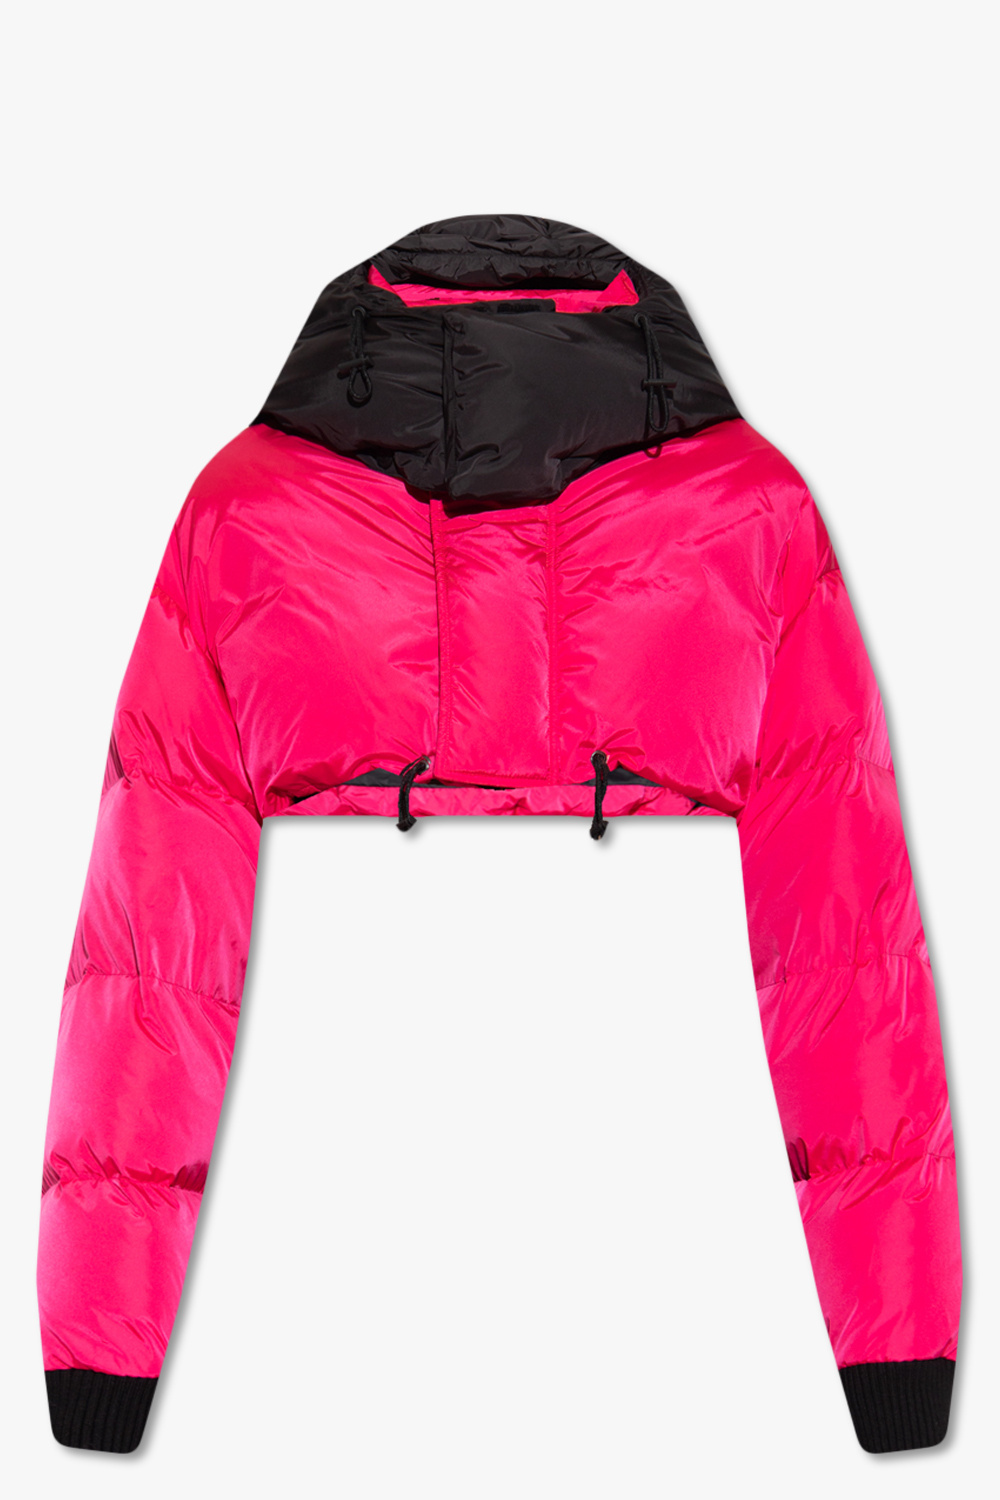 Dsquared2 Daos hooded down jacket